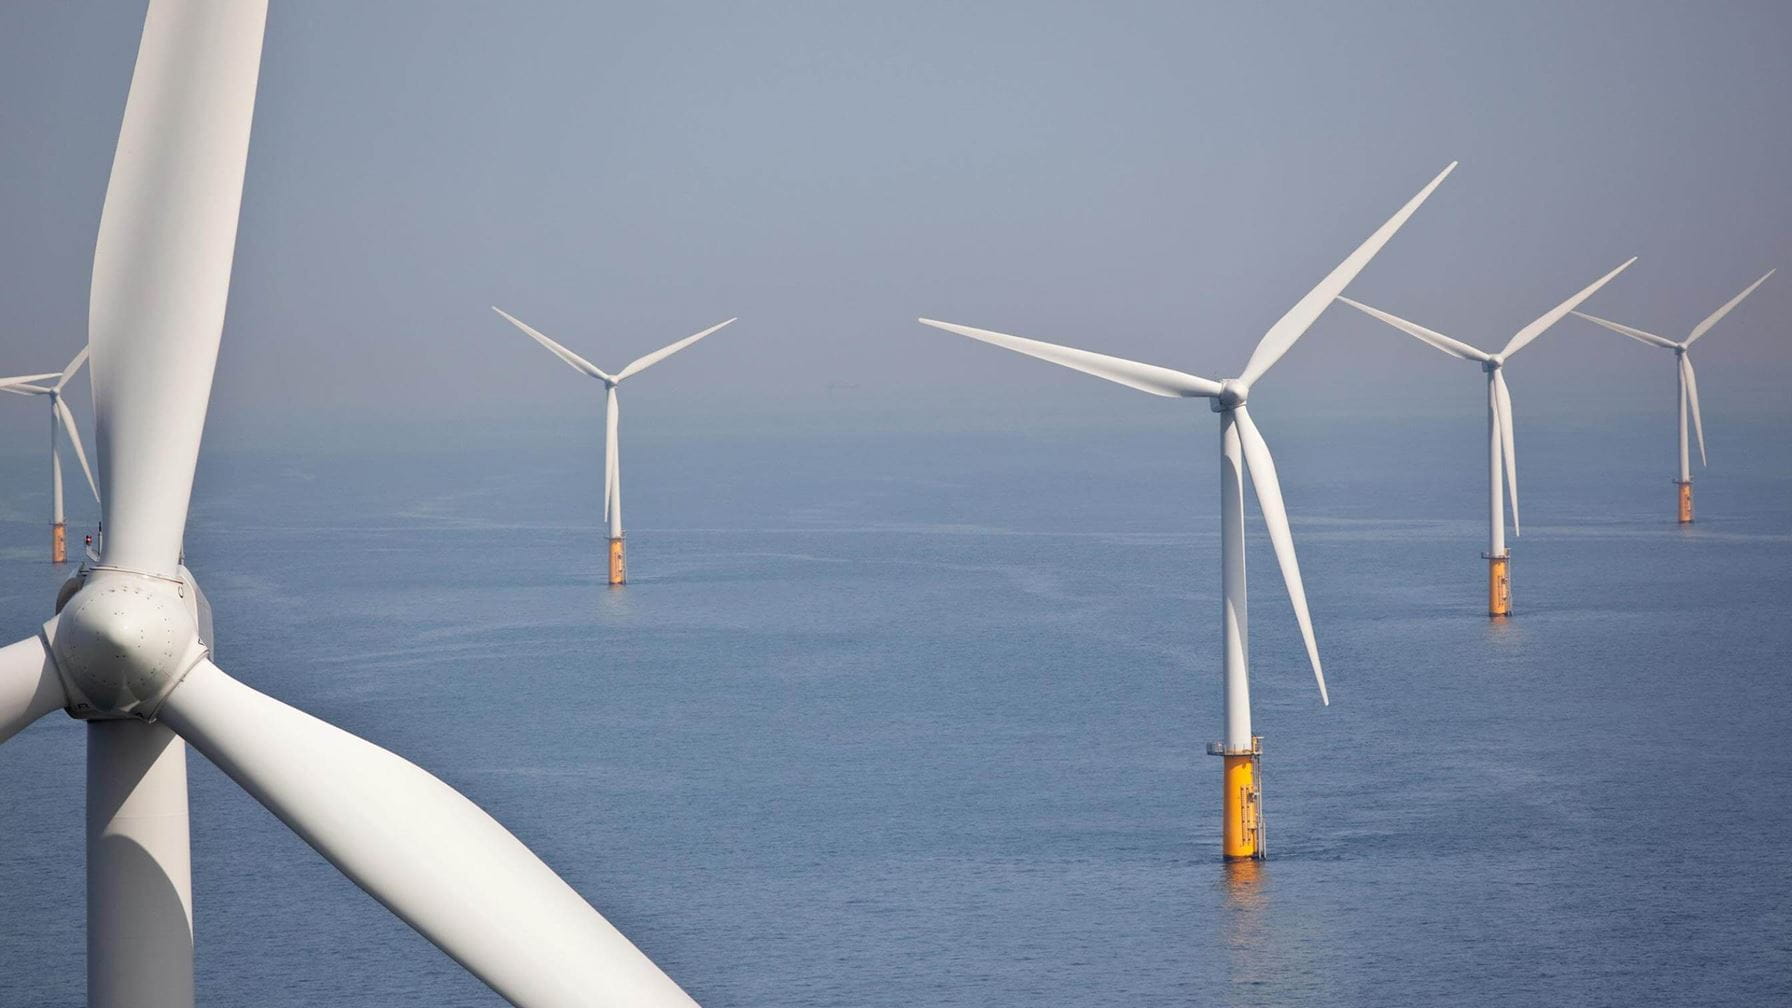 Powering an offshore wind farm